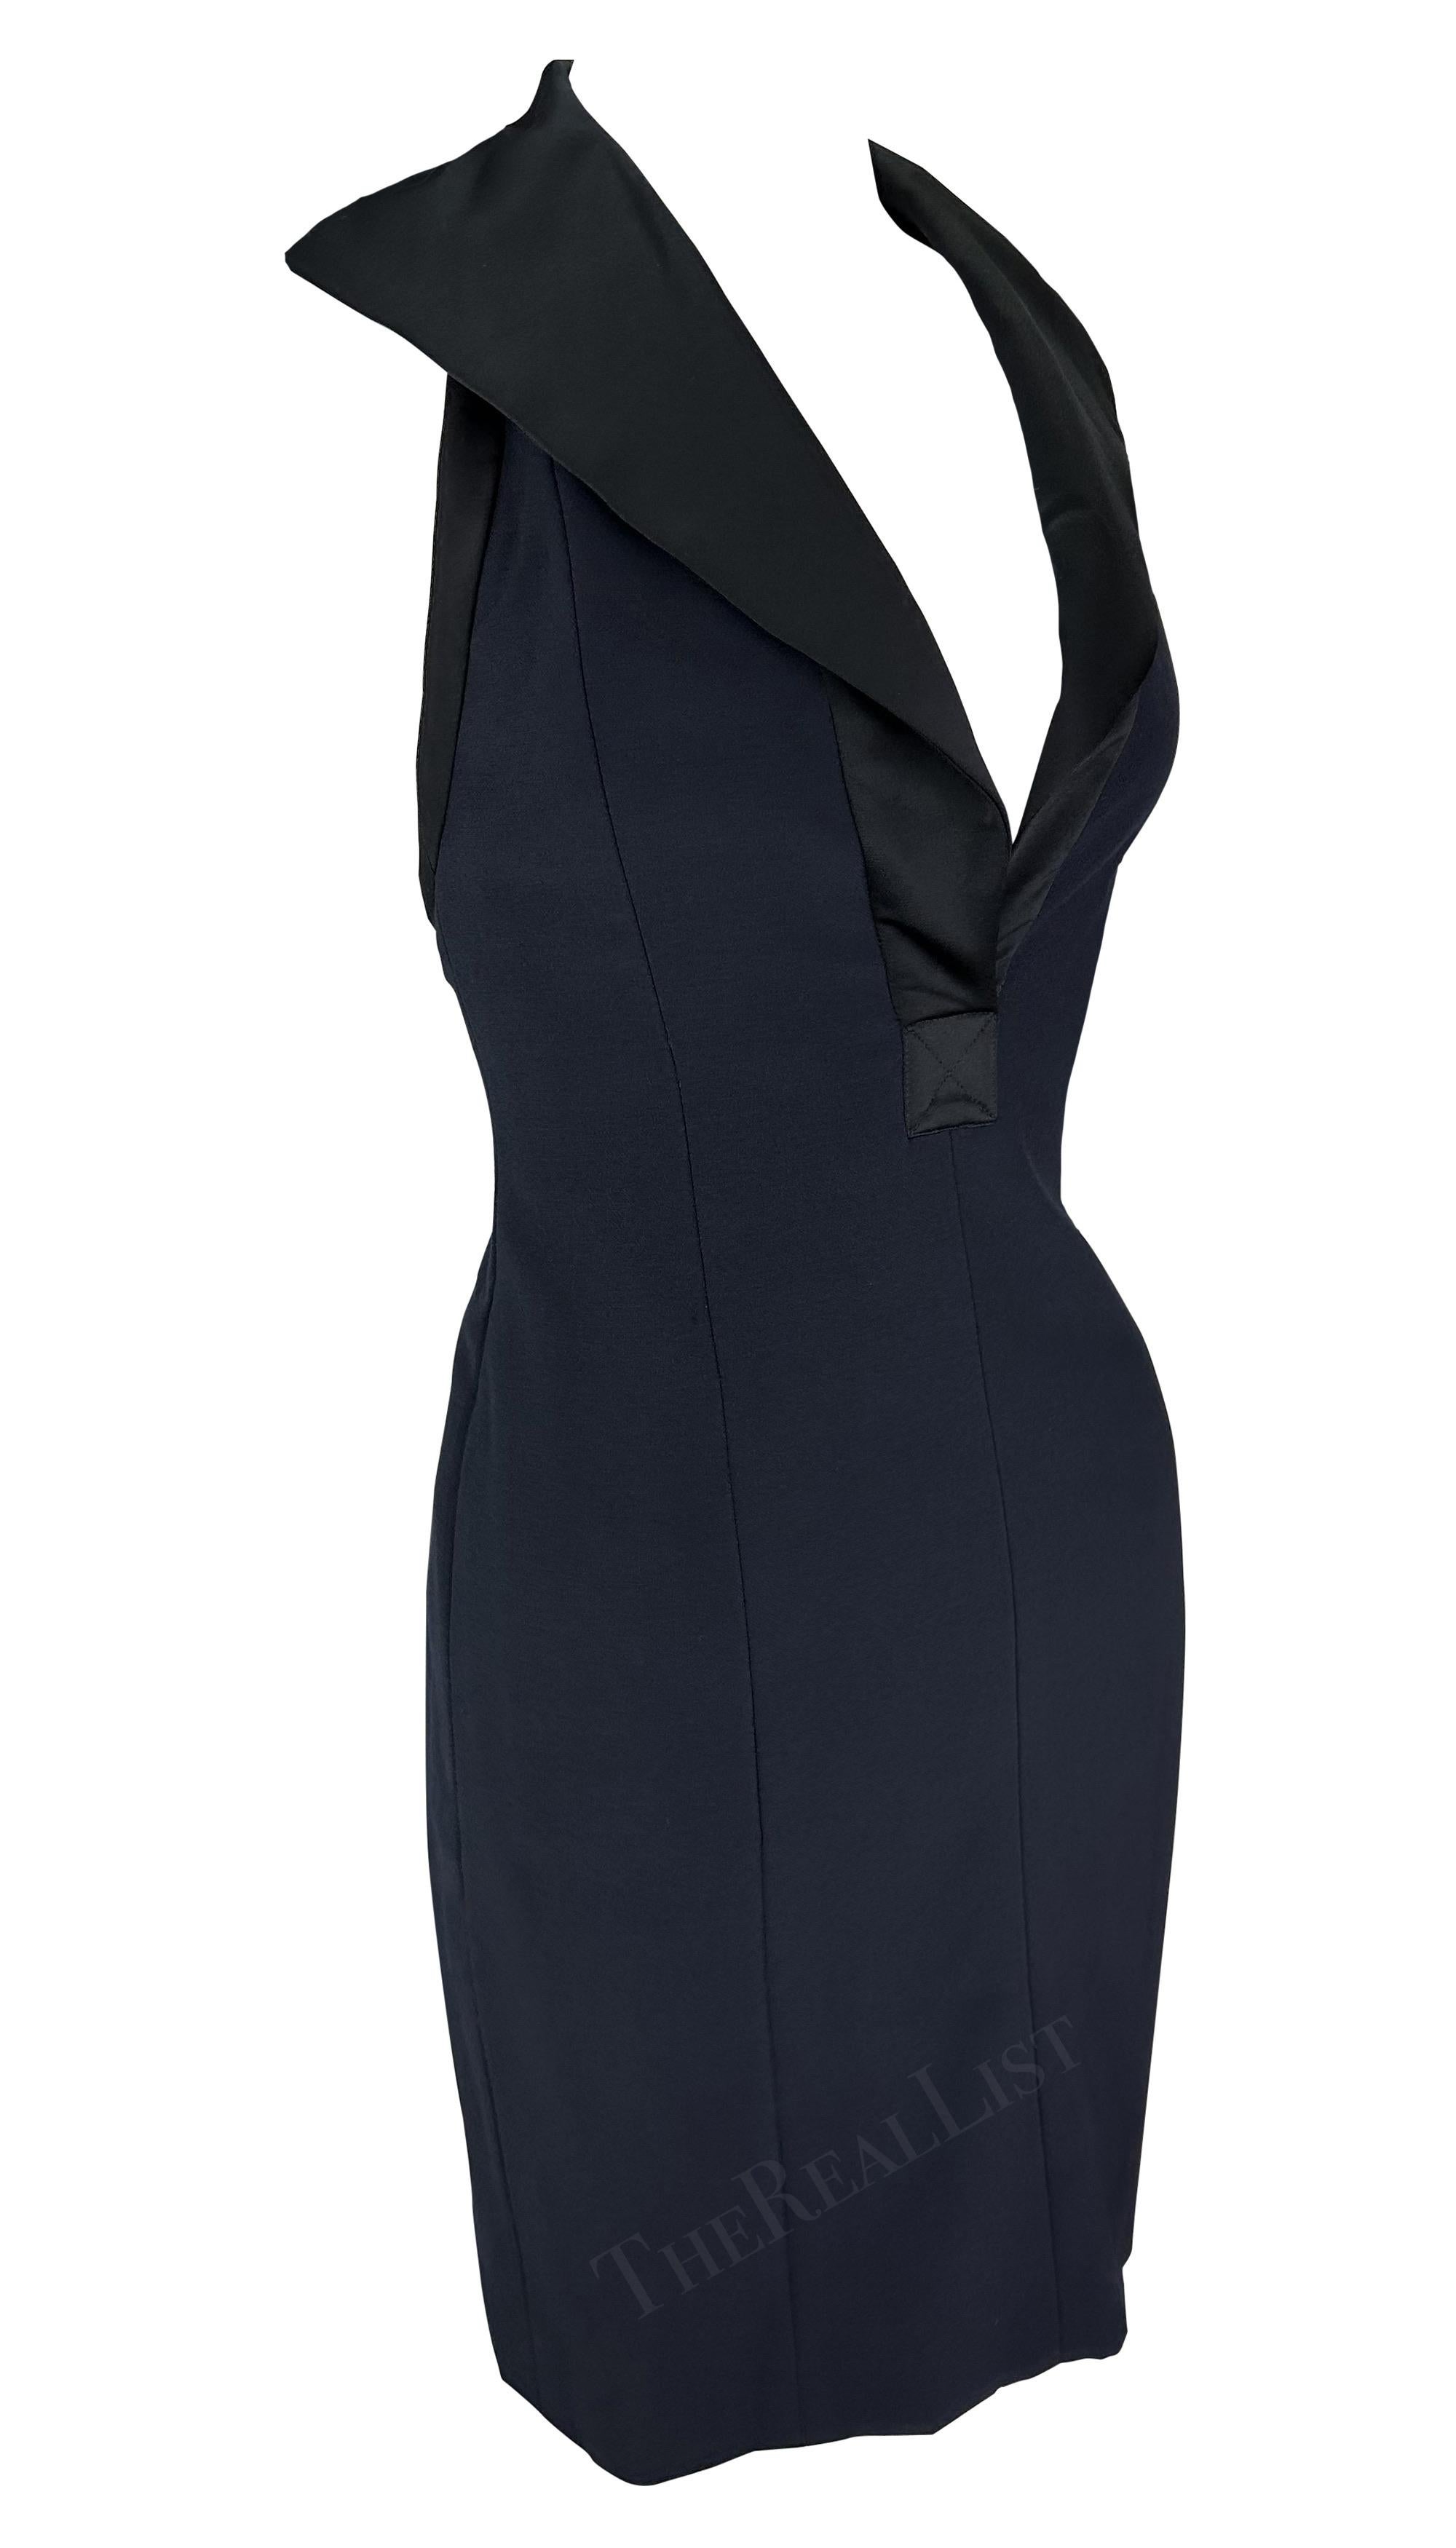 Presenting a fabulous navy blue Yves Saint Laurent halterneck mini dress, designed by Yves Saint Laurent. From the late 1990s, this gorgeous YSL dress features a plunging neckline, an oversized black fold-over collar, an exposed back, and a halter